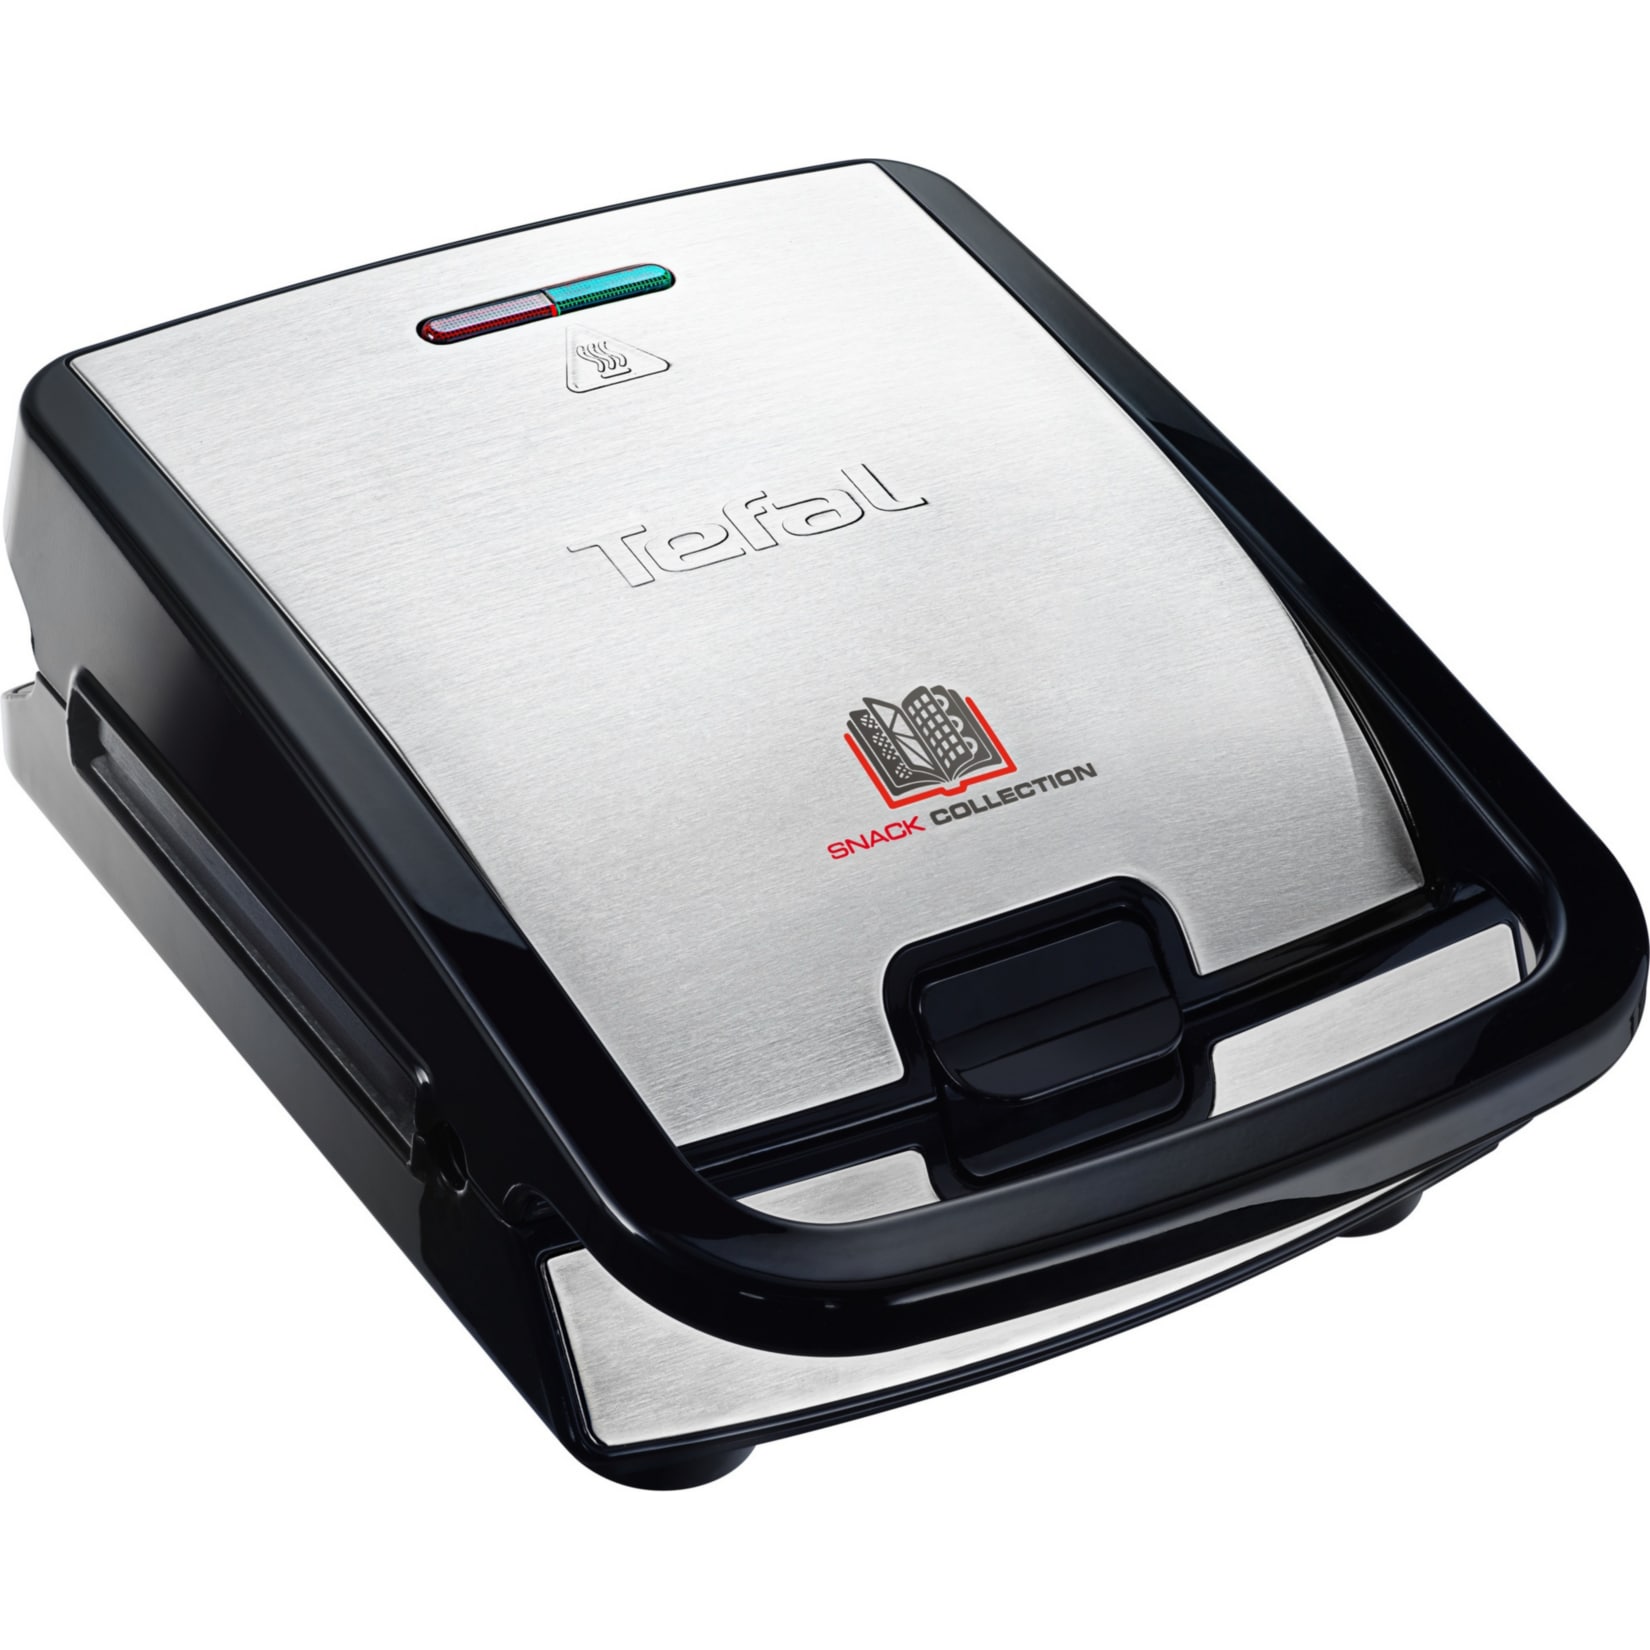 Tefal Sandwichmaker Snack Collection SW852D